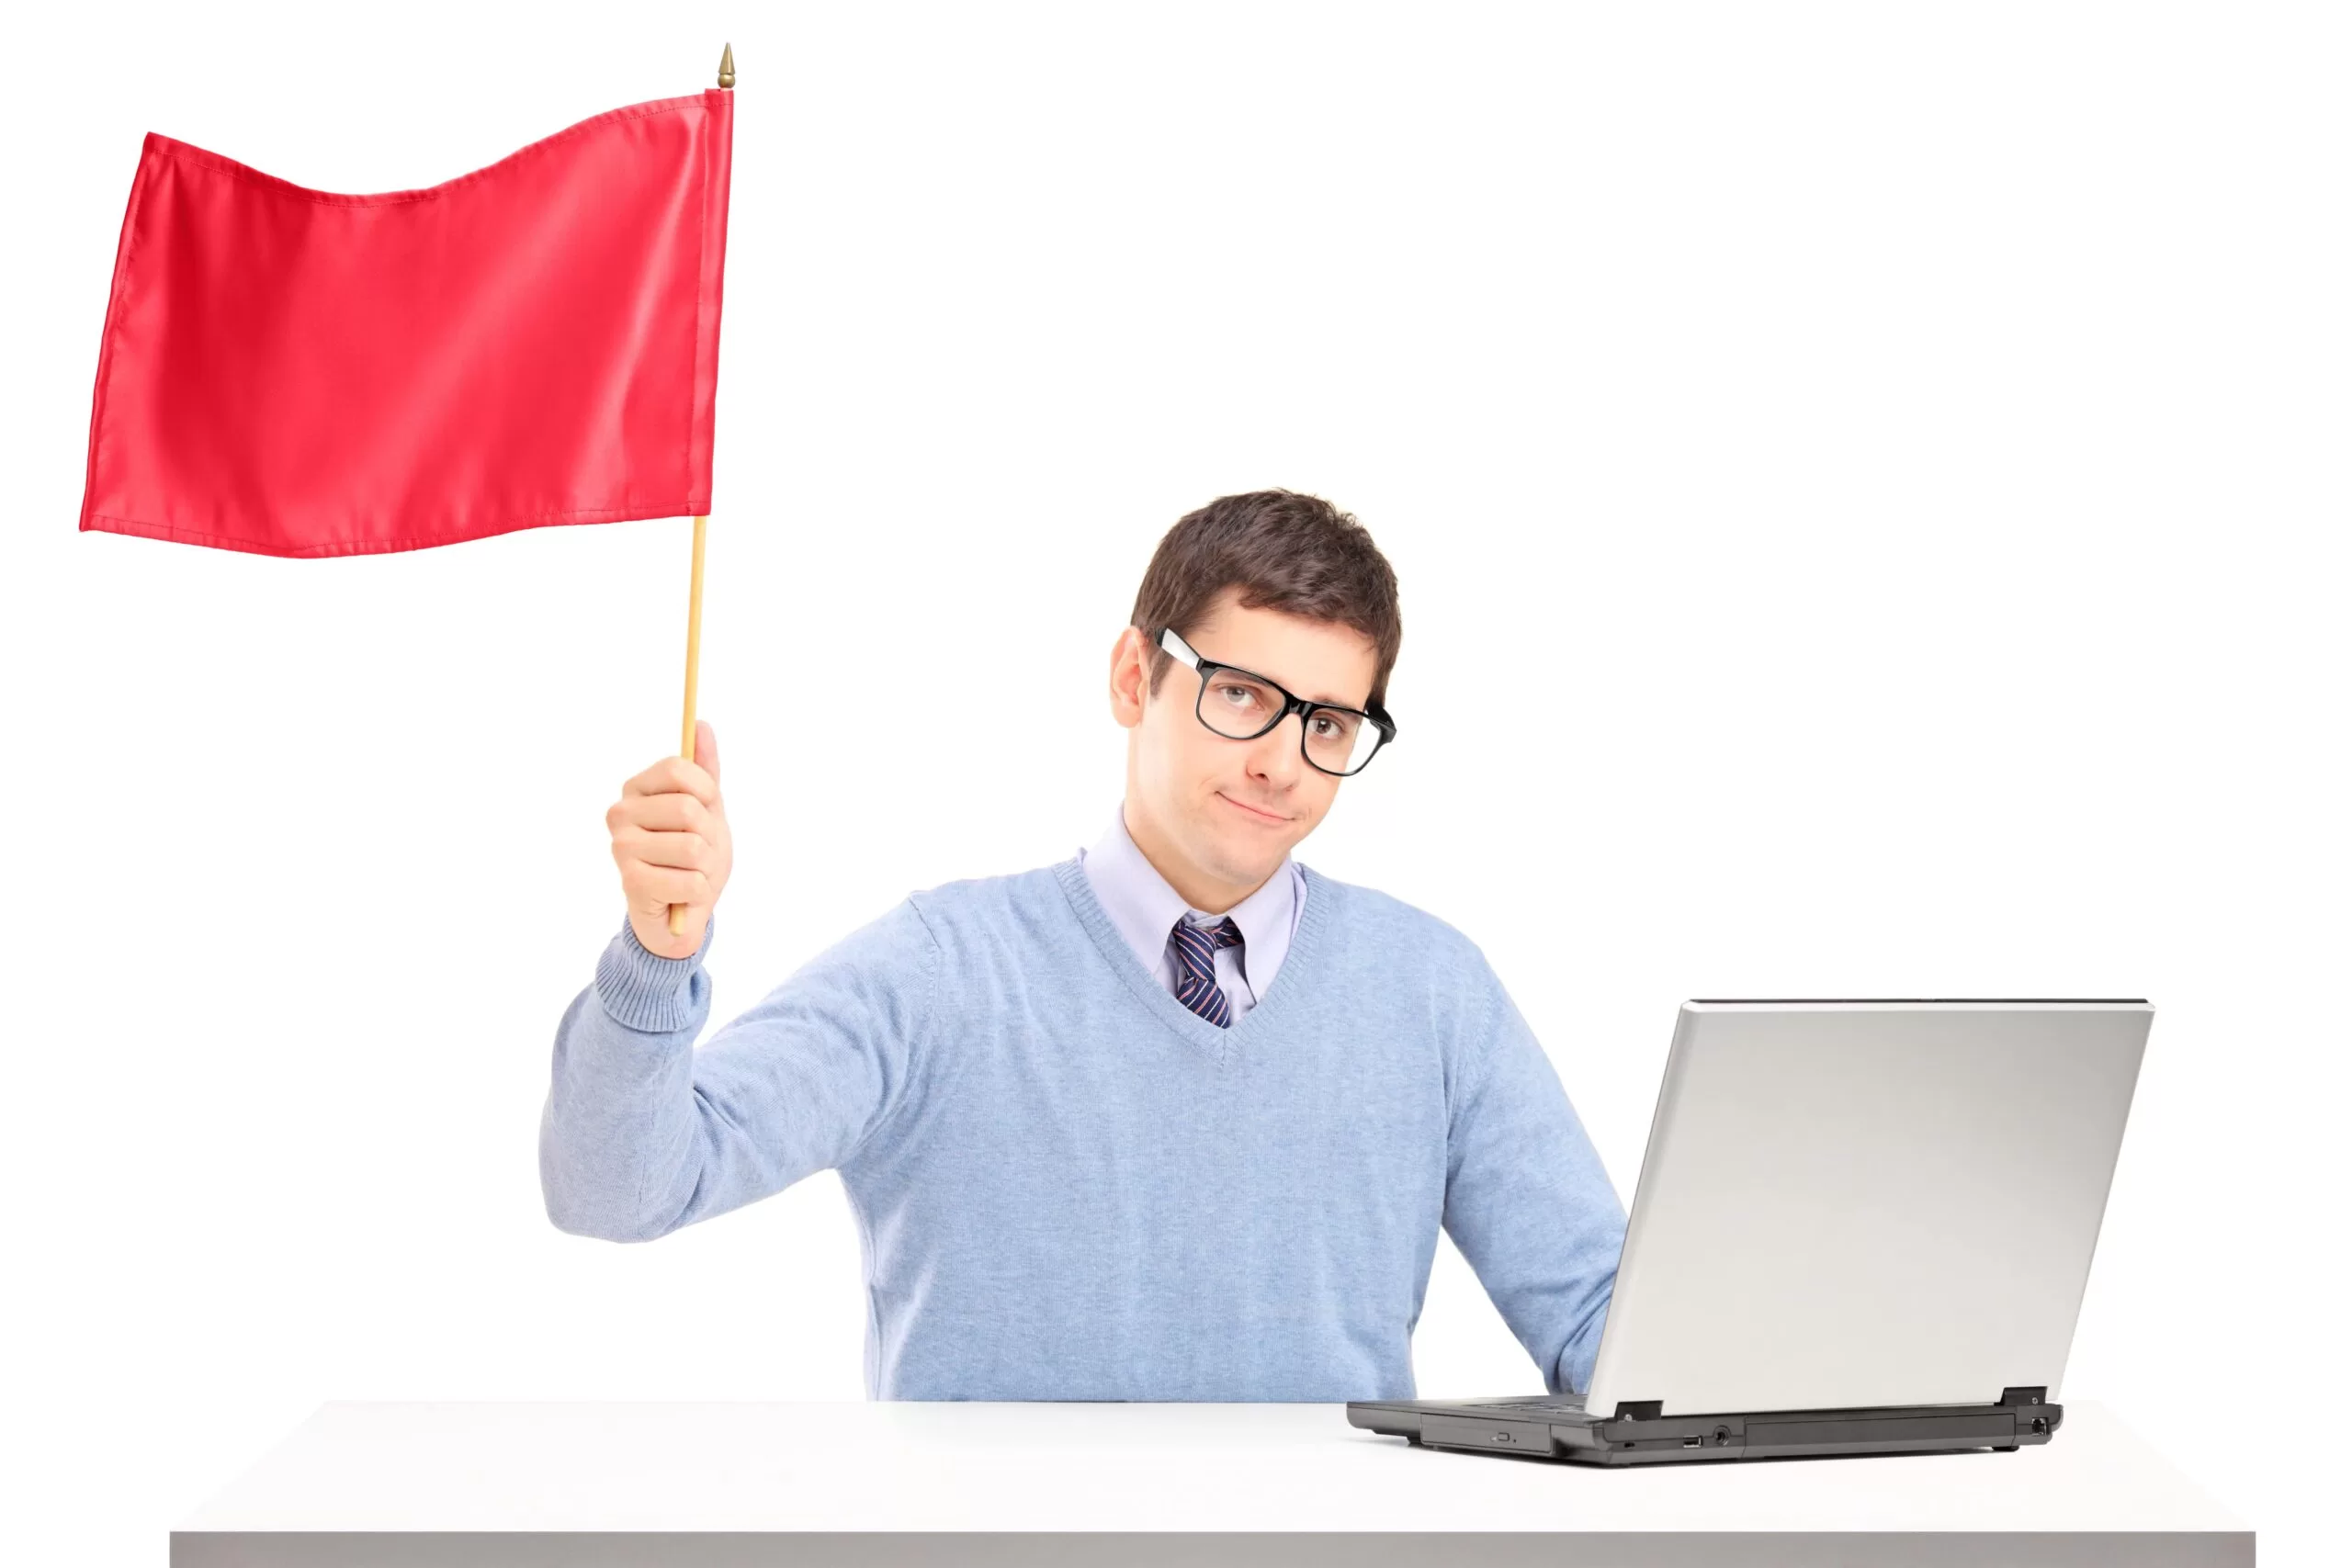 man sitting with laptop and waving a red flag